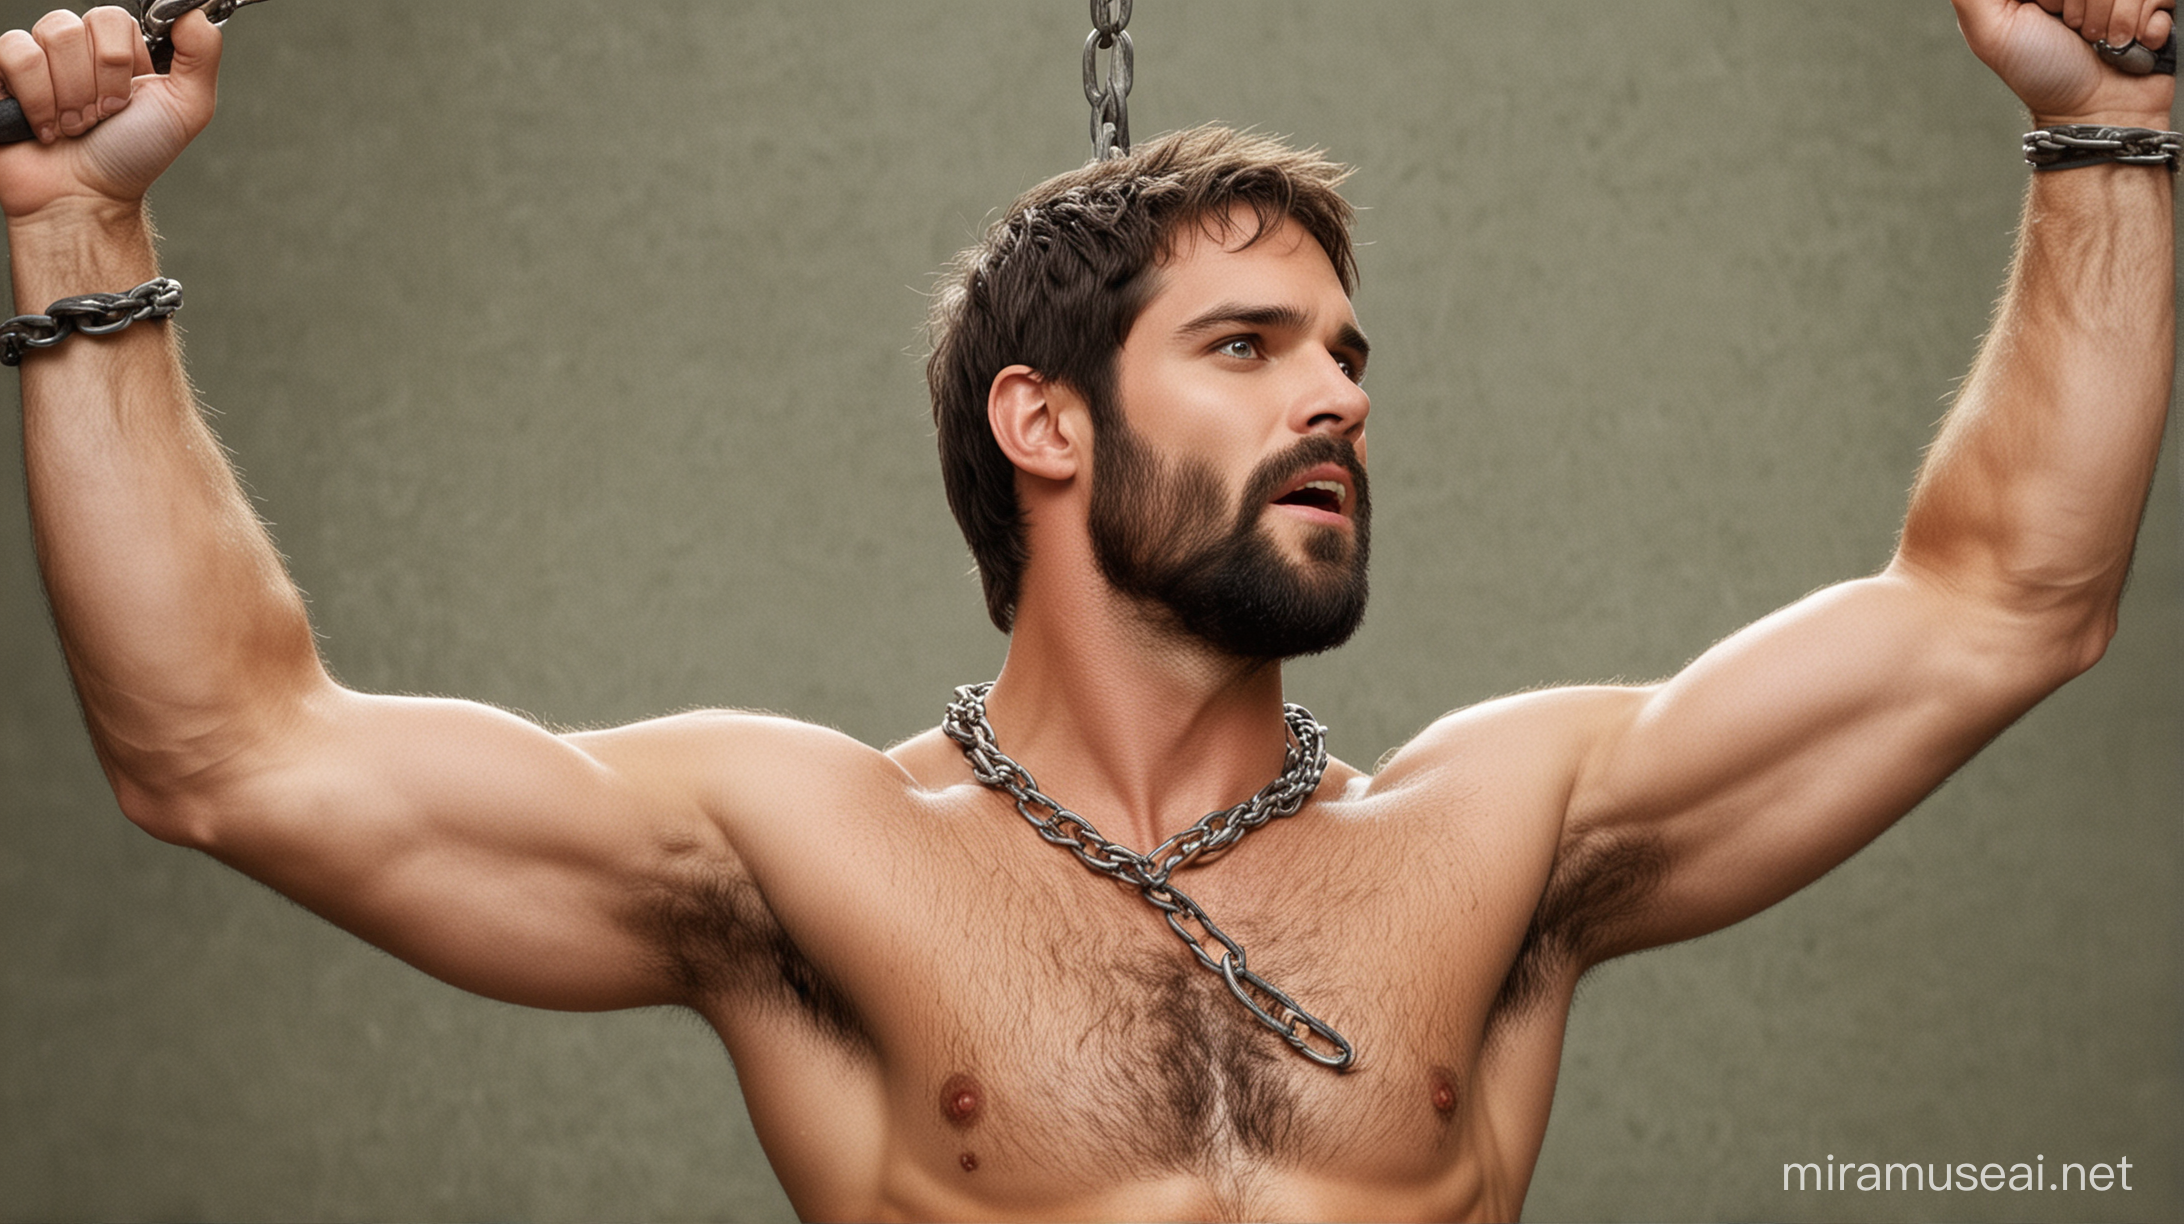 Very hairy version of actor Brant Daugherty, with a lot of beard and a very hairy body. Daugherty, slave, wrists tied with chains, raising and stretching his arms, showing very hairy armpits, green eyes, no shirt, very hairy chest like in the past, short hair, serious expression, bearded, very hairy body and chest.